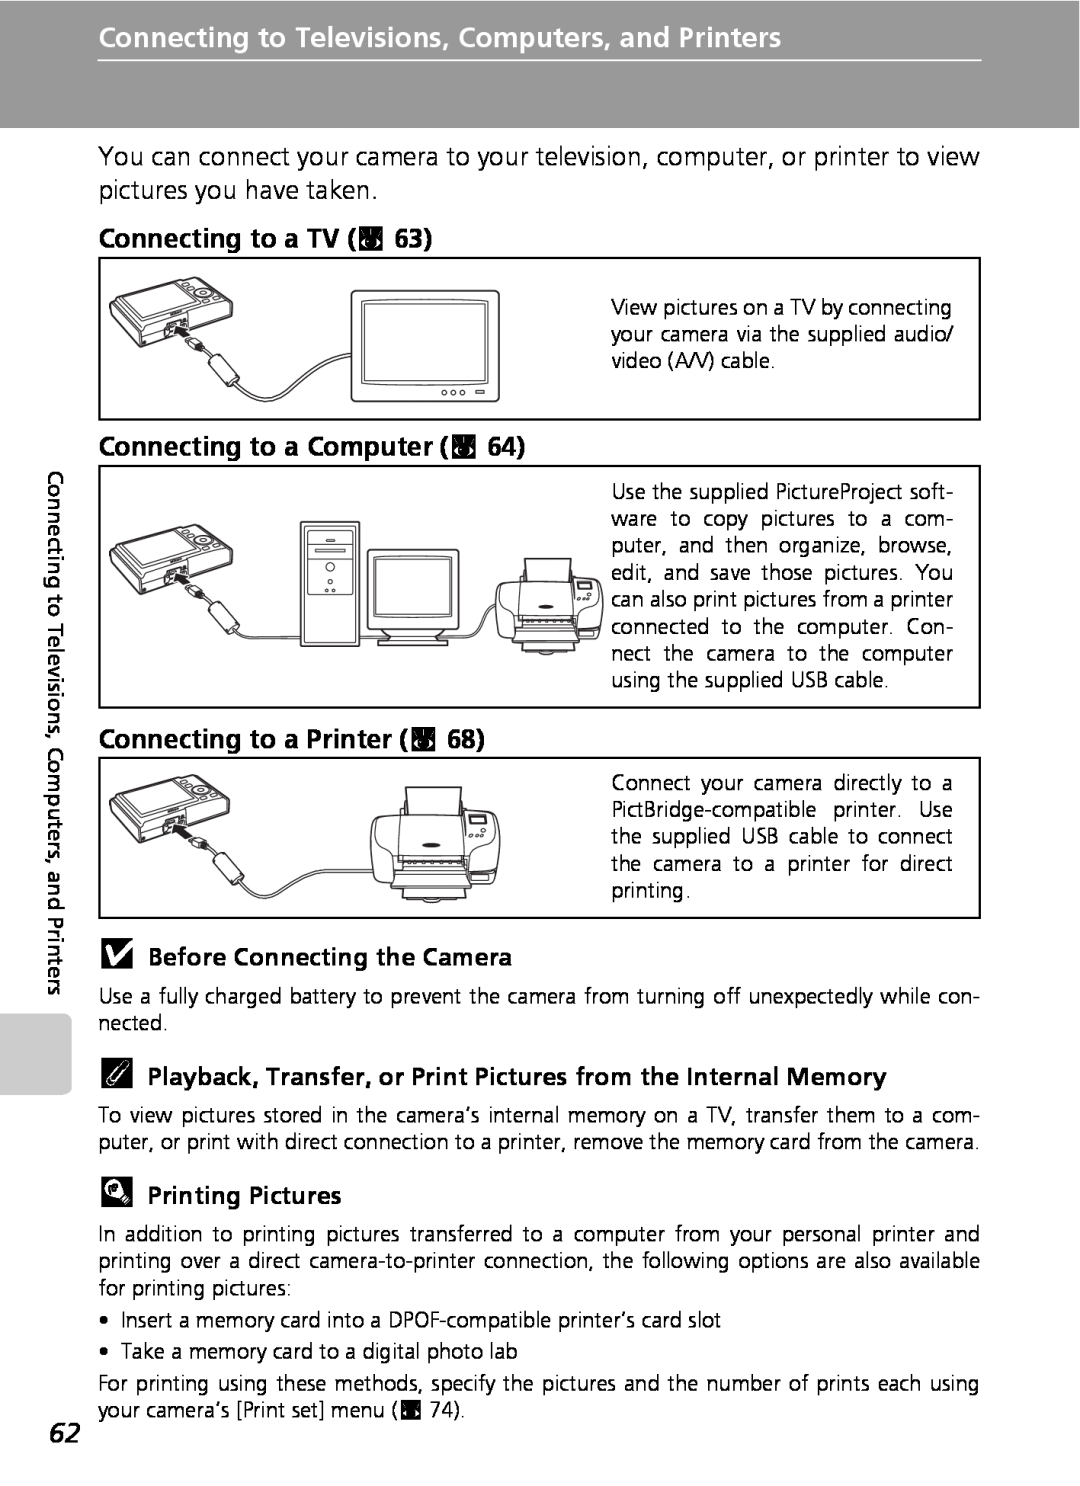 Nikon S9 manual Connecting to a TV c, Connecting to a Computer c, Connecting to a Printer c, jBefore Connecting the Camera 